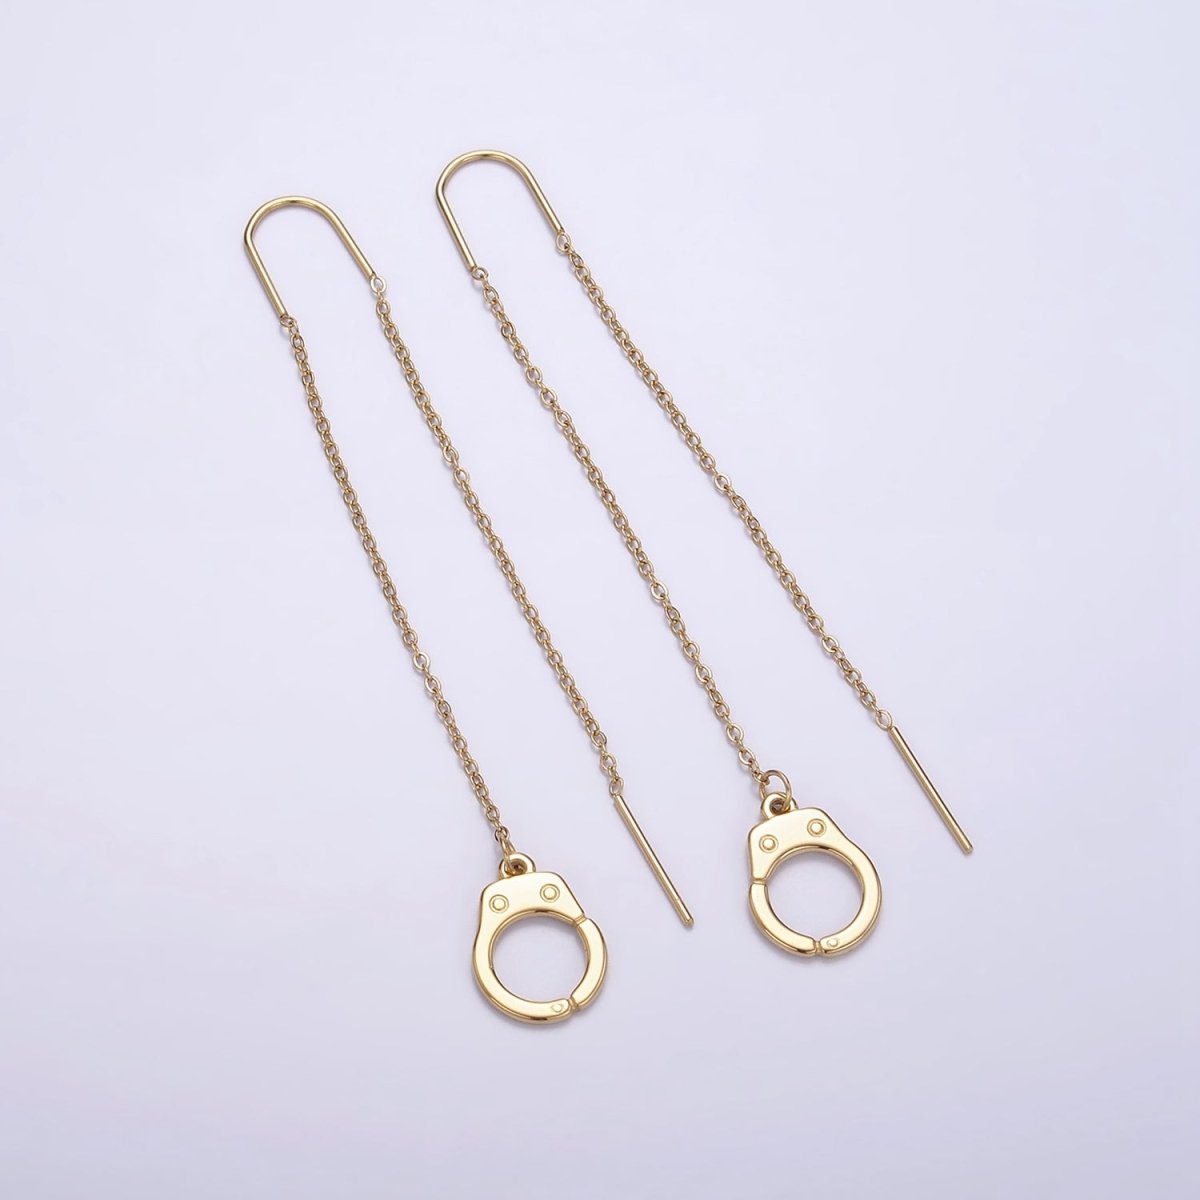 Stainless Steel Hand Cuff Cable Link Chain Threader Earrings | AE745 - DLUXCA